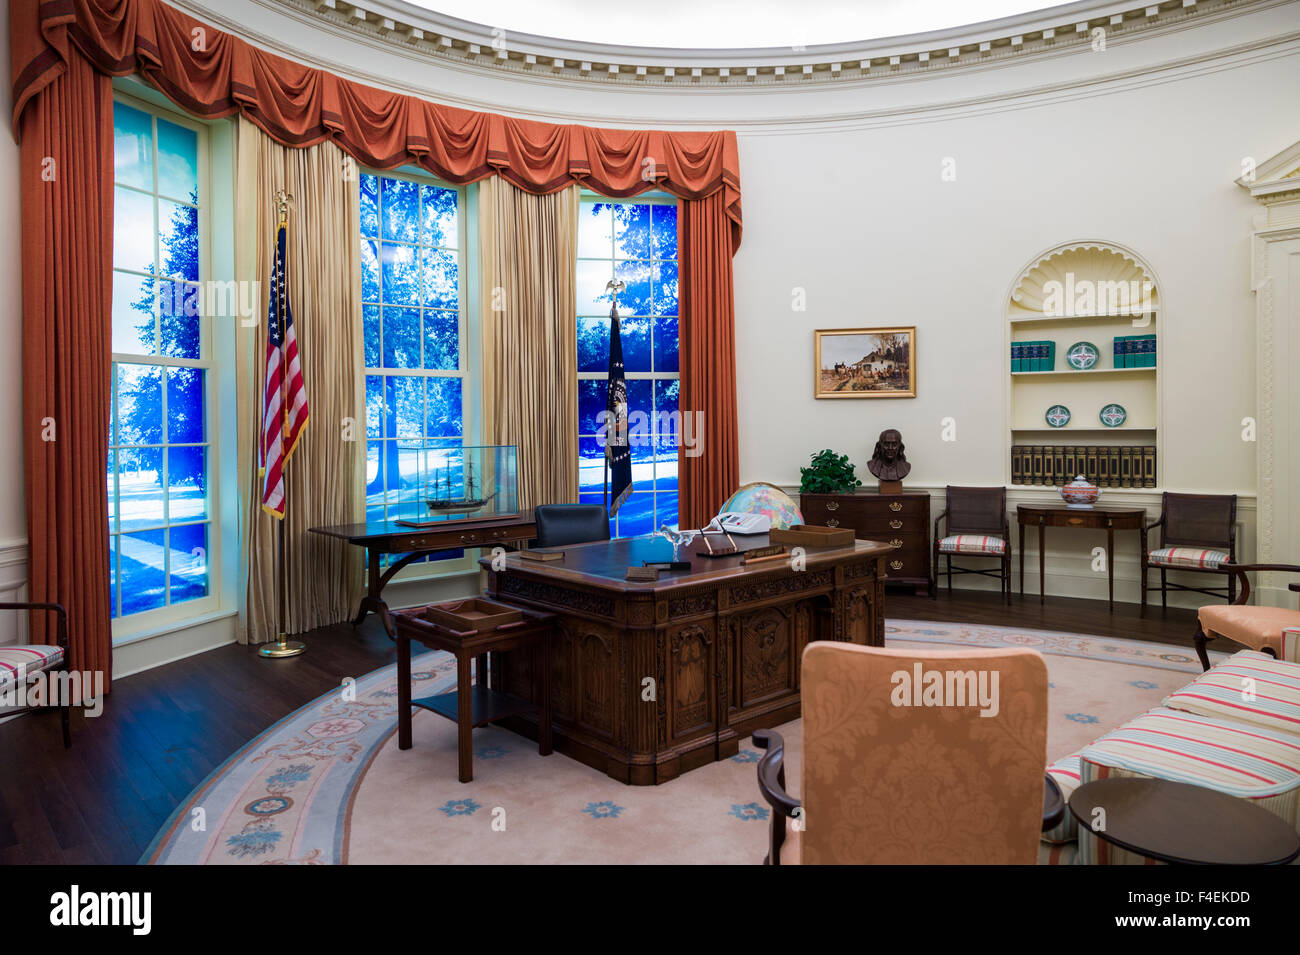 Georgia, Atlanta, Carter Presidential Center, library and museum of former President Jimmy Carter, replica of the Carter-era Oval Office in the White House Stock Photo